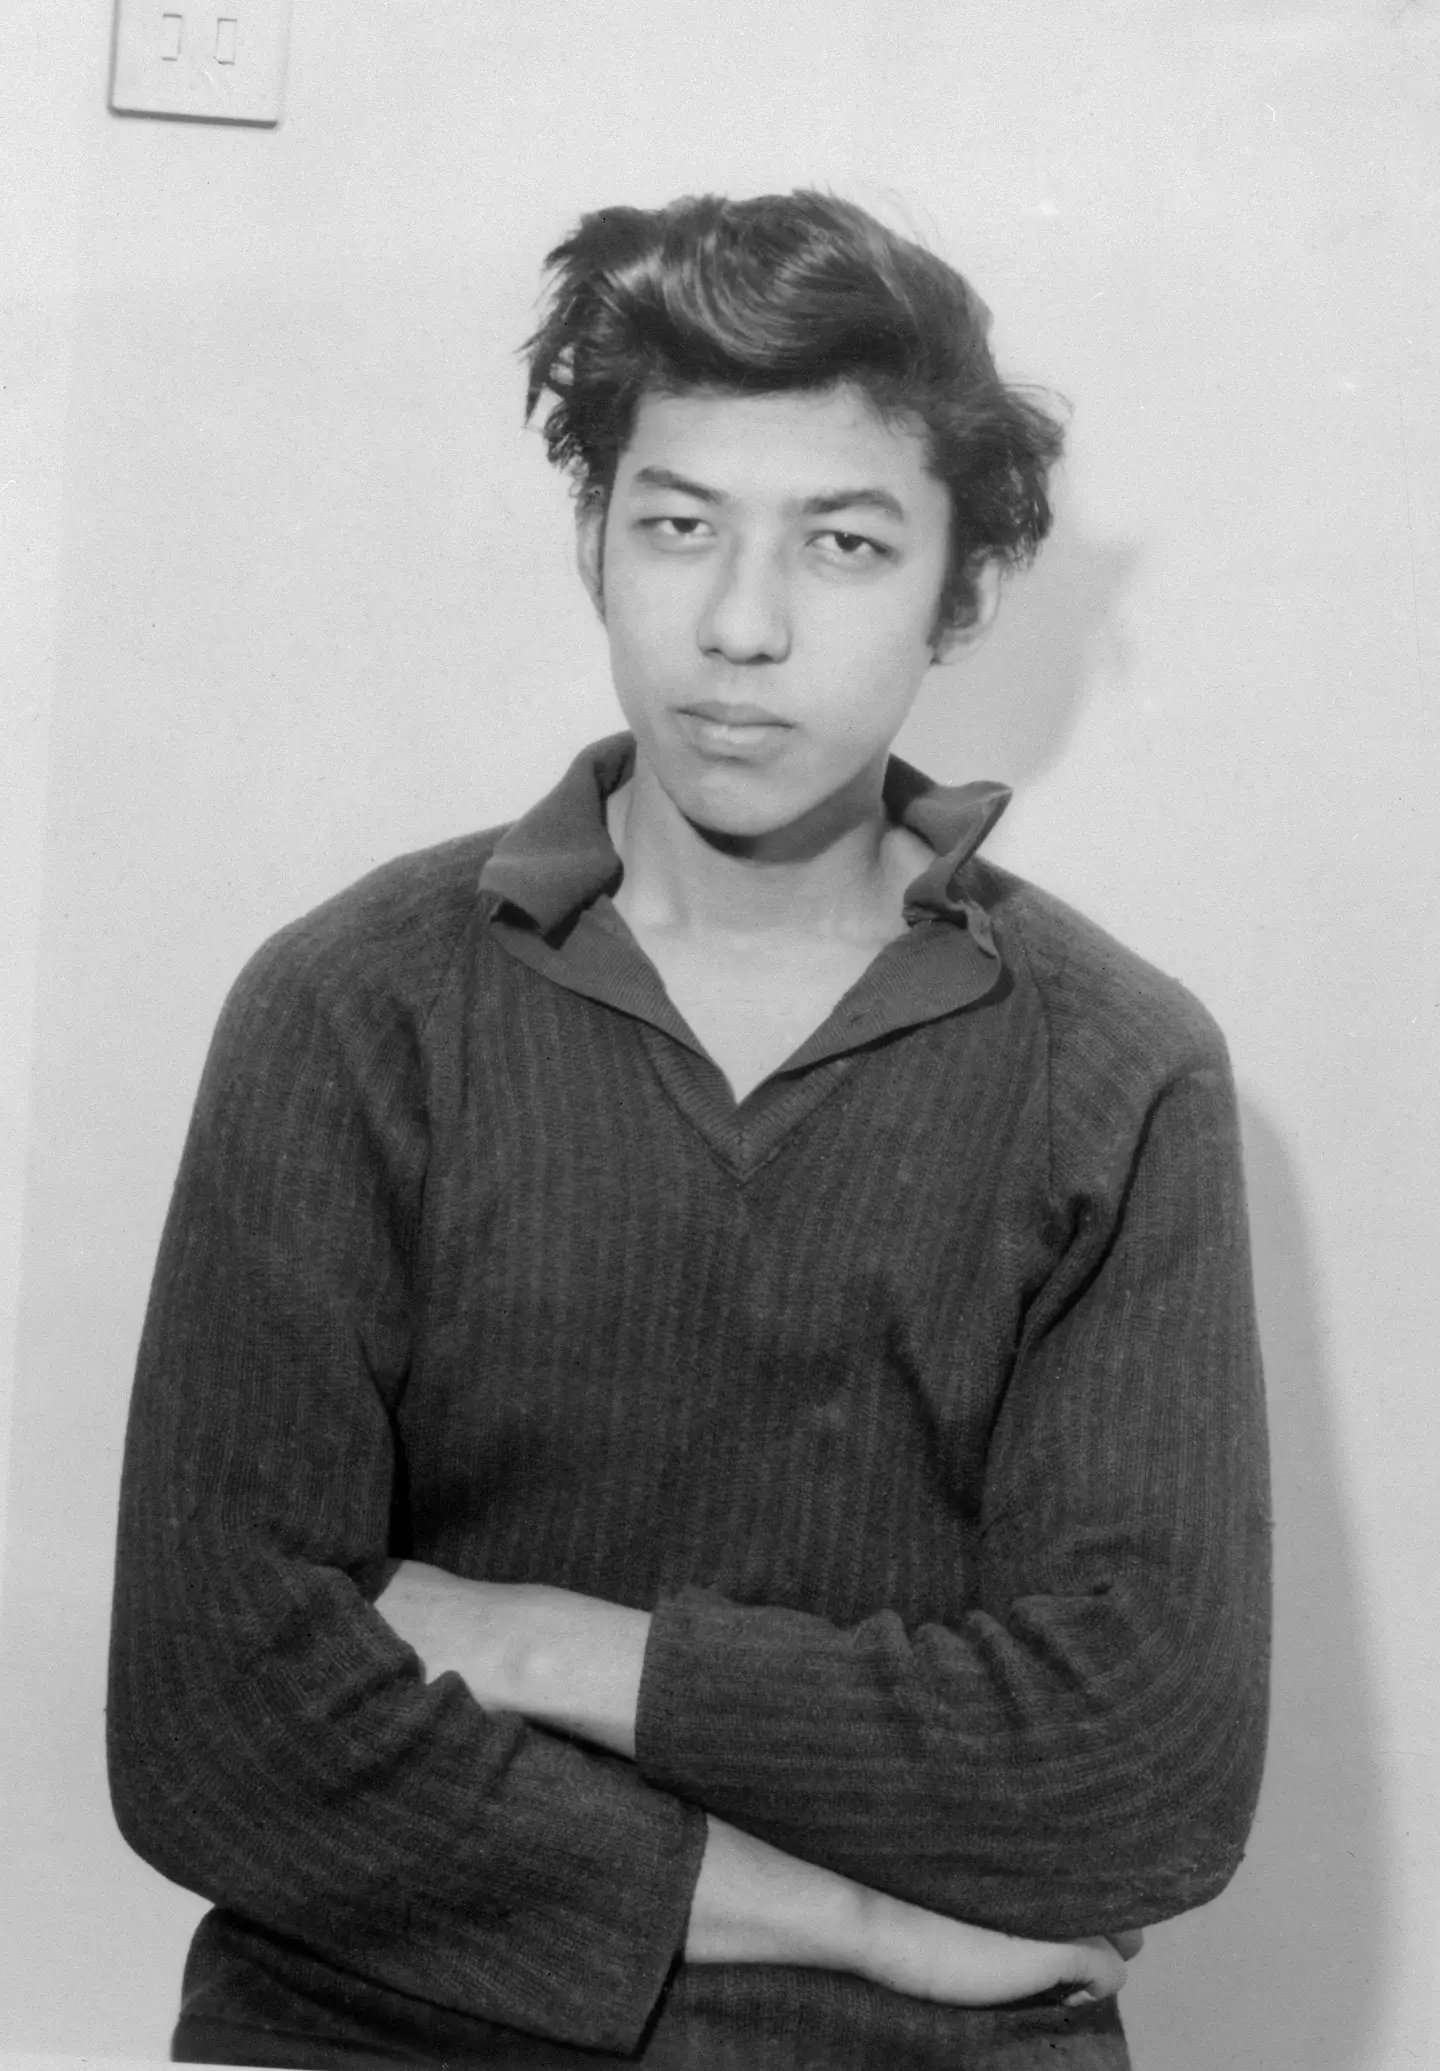 Nizamodeen Hosein was one of the brothers who murdered Muriel McKay.